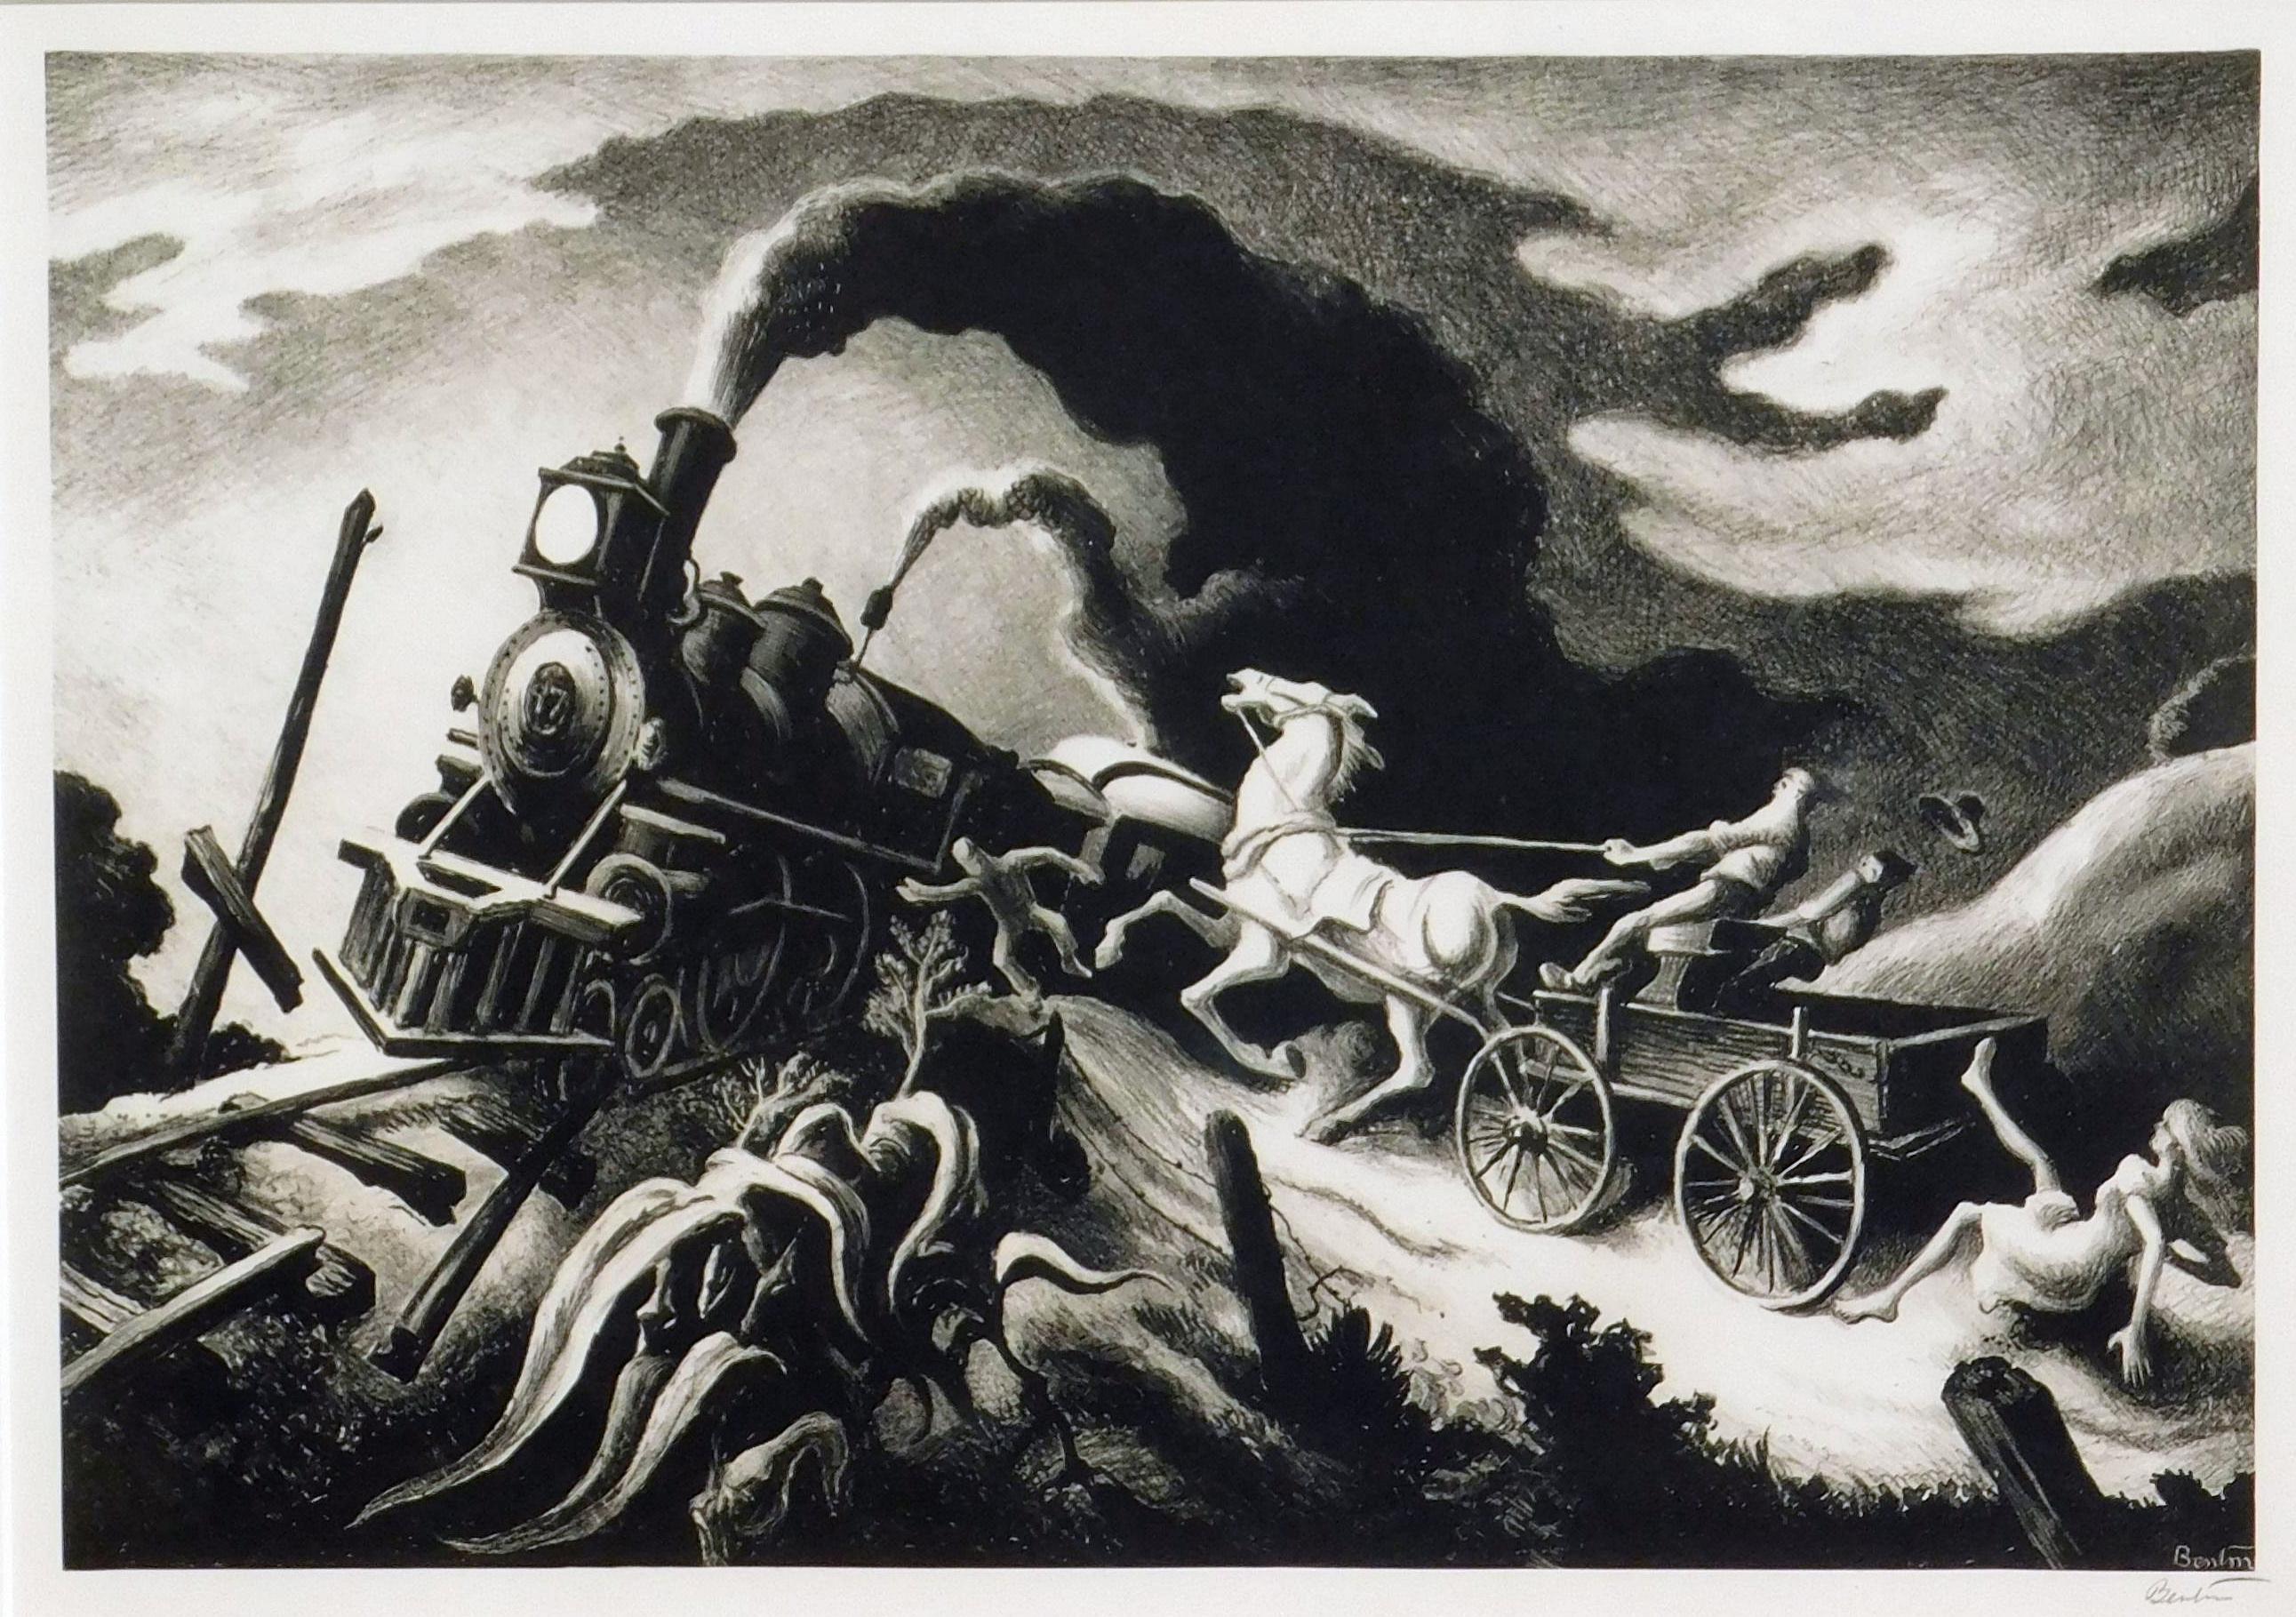 Original stone lithograph created 1944 by well-known Regionalist Thomas Hart Benton.
The print is in excellent condition with full margins and pencil signed lower right. Also signed in the stone.
It is matted in a 4-ply archival mat and rests in a